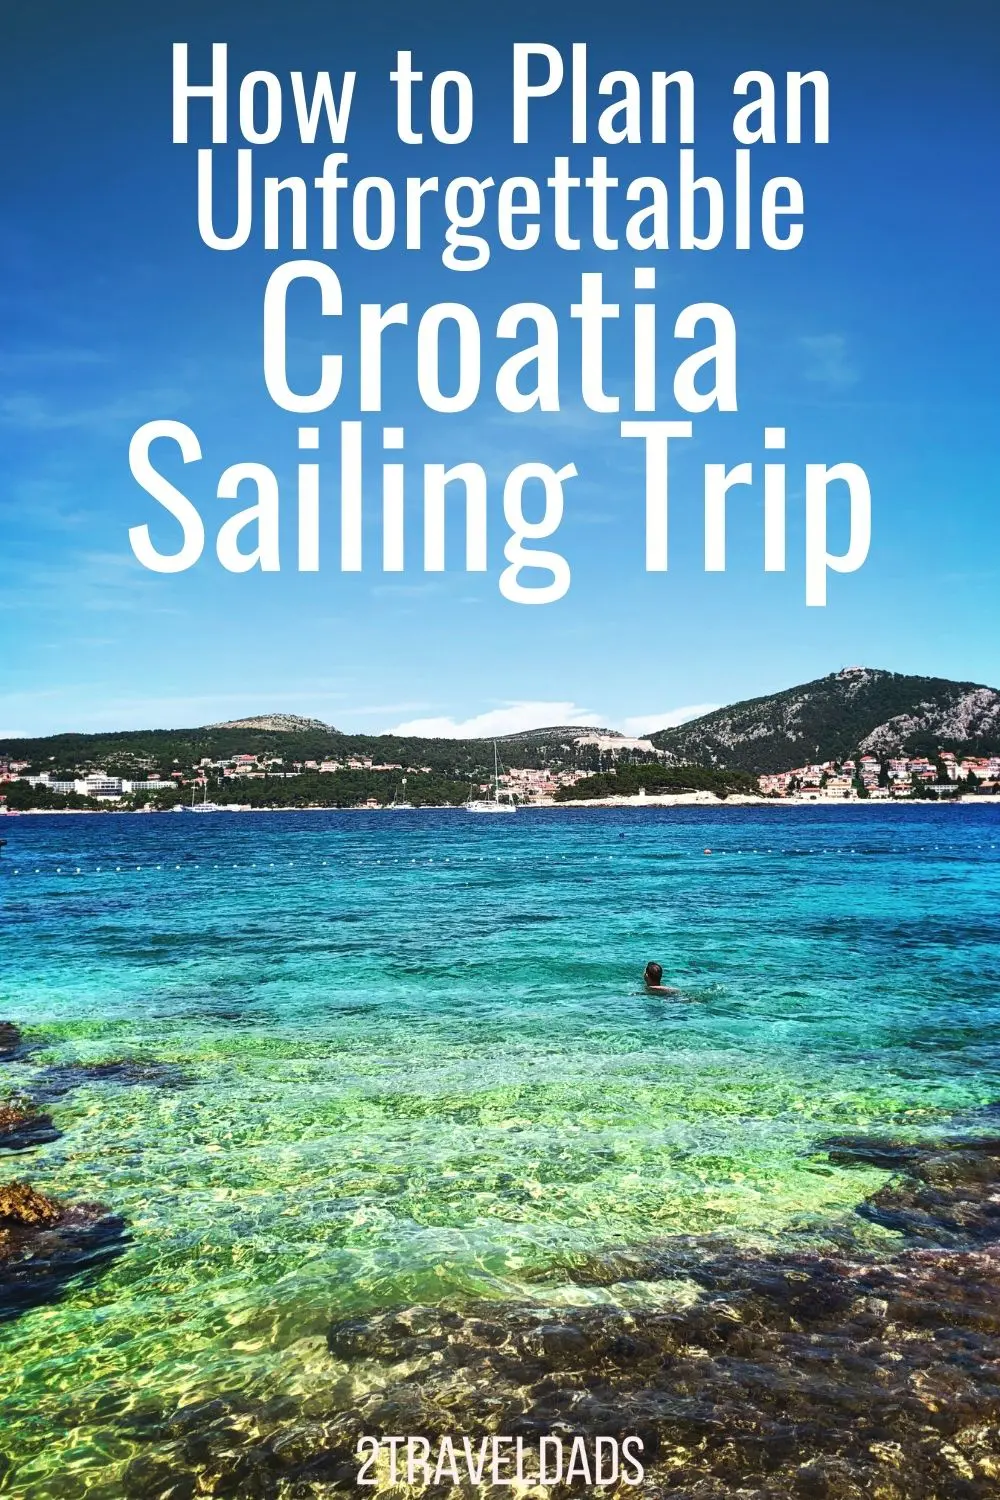 Sailing the coast of Croatia is unforgettable, with medieval towns, pristine beaches (and nude ones!) and incredible Croatian food. See how to plan a sailing trip in Croatia including packing lists and finding flights.